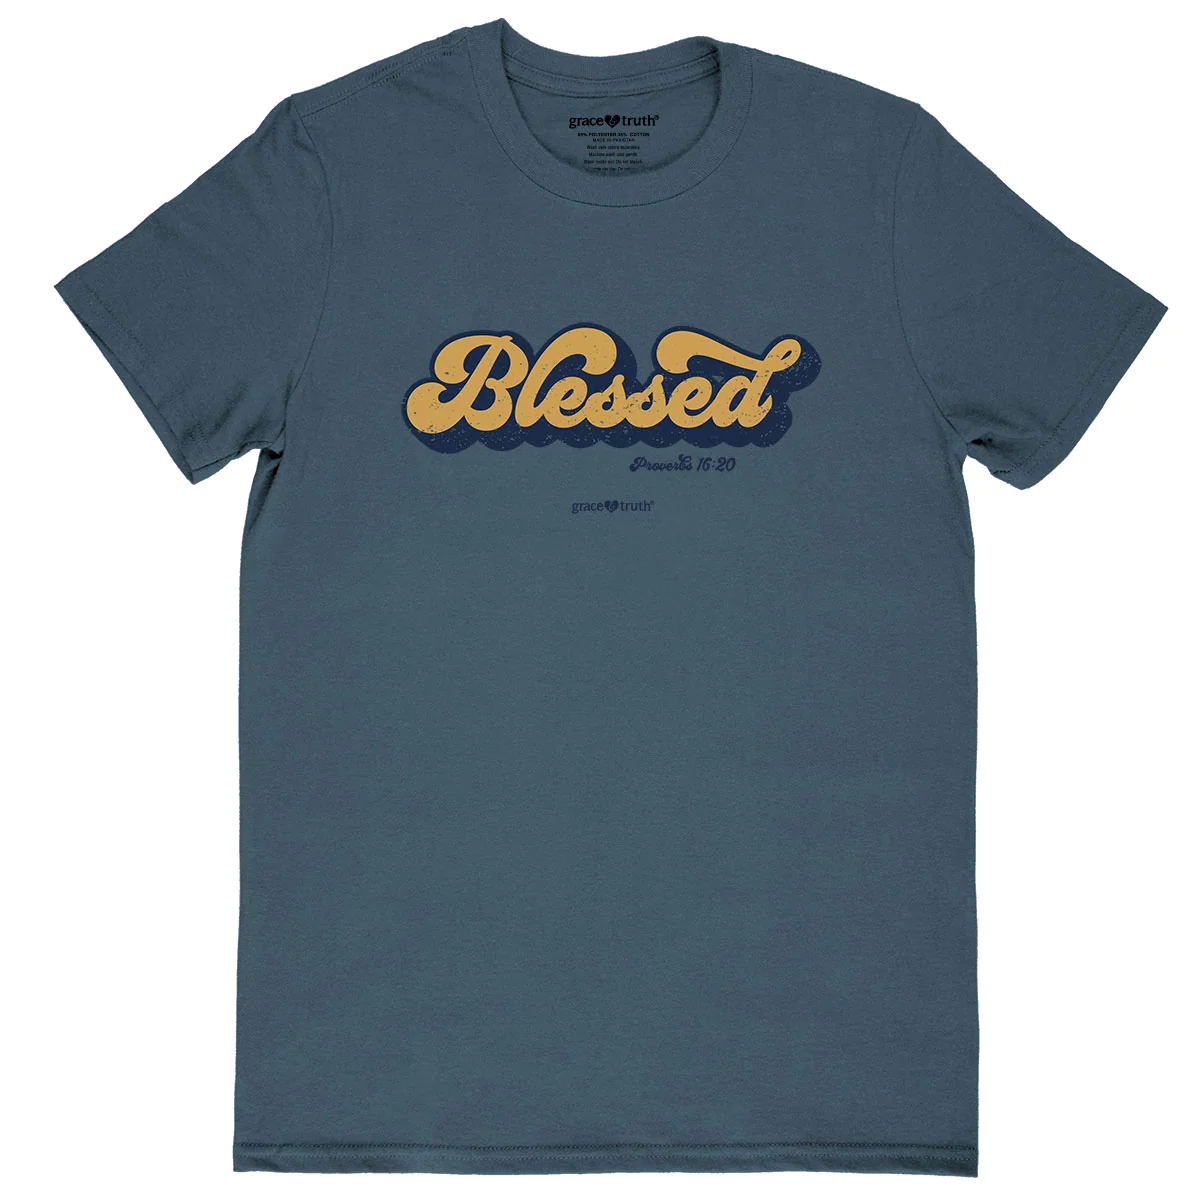 "Blessed" (Proverbs 16:20) Women's T-Shirt - GTA4401